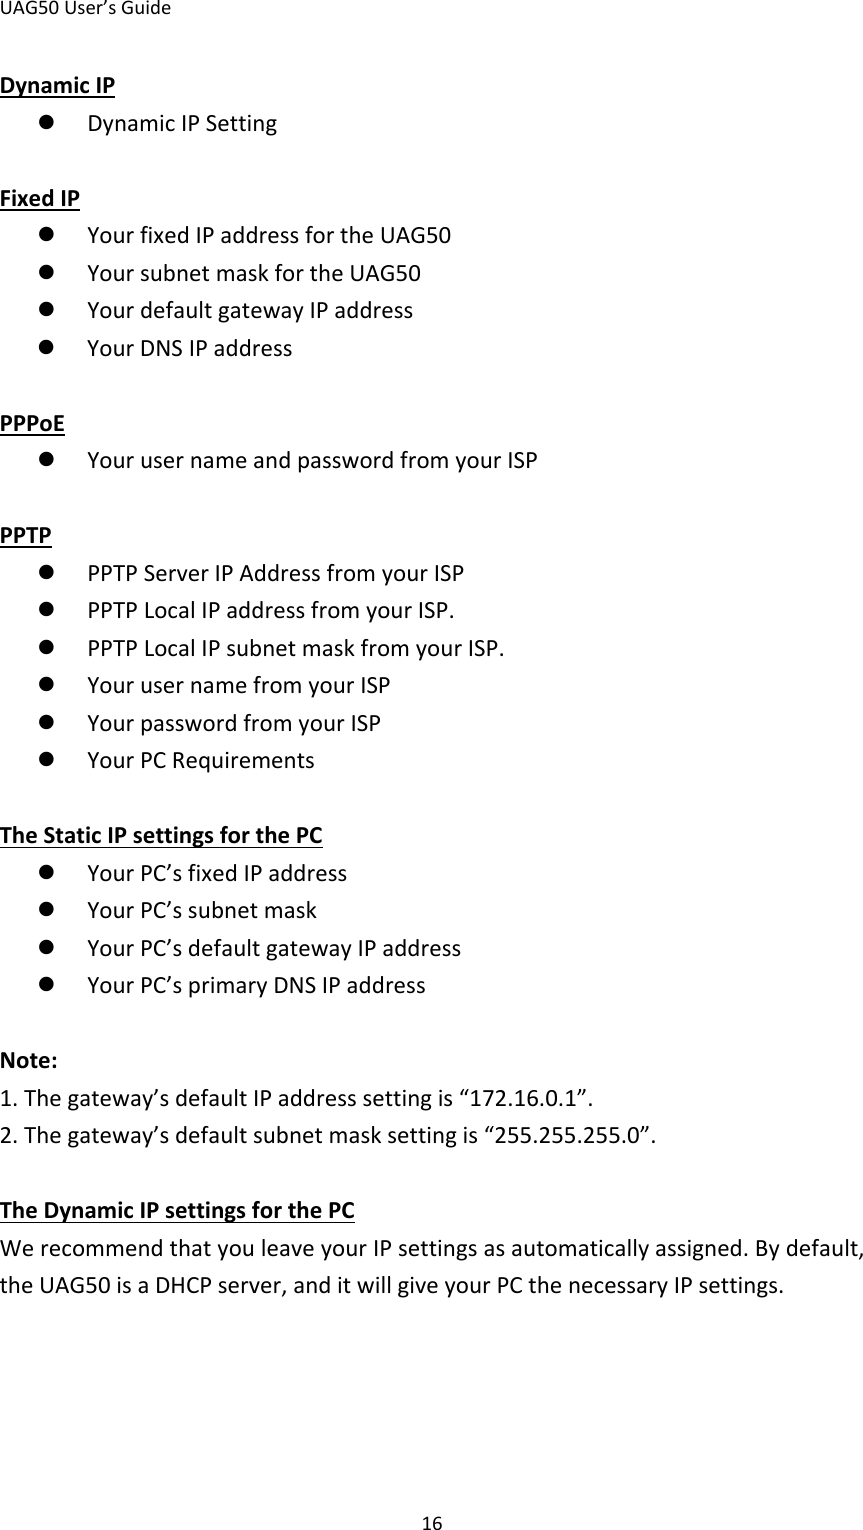 UAG50 User’s Guide 16 Dynamic IP  Dynamic IP Setting  Fixed IP  Your fixed IP address for the UAG50  Your subnet mask for the UAG50  Your default gateway IP address  Your DNS IP address  PPPoE  Your user name and password from your ISP  PPTP  PPTP Server IP Address from your ISP  PPTP Local IP address from your ISP.  PPTP Local IP subnet mask from your ISP.  Your user name from your ISP  Your password from your ISP  Your PC Requirements  The Static IP settings for the PC  Your PC’s fixed IP address  Your PC’s subnet mask  Your PC’s default gateway IP address  Your PC’s primary DNS IP address  Note: 1. The gateway’s default IP address setting is “172.16.0.1”. 2. The gateway’s default subnet mask setting is “255.255.255.0”.  The Dynamic IP settings for the PC We recommend that you leave your IP settings as automatically assigned. By default, the UAG50 is a DHCP server, and it will give your PC the necessary IP settings. 